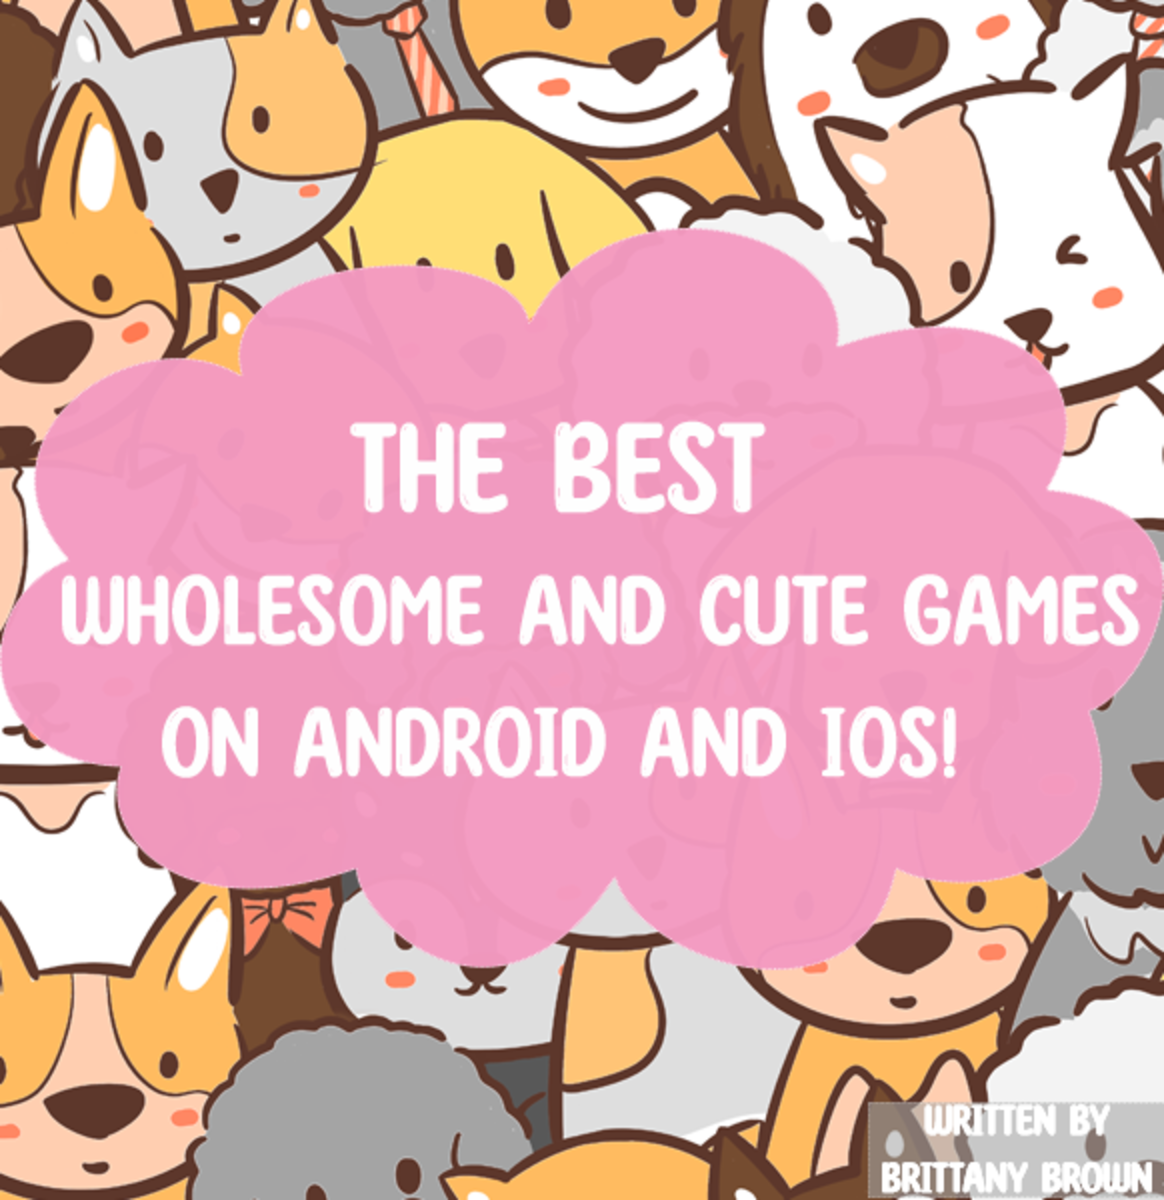 The best free wholesome and cute games for iOS and Android!